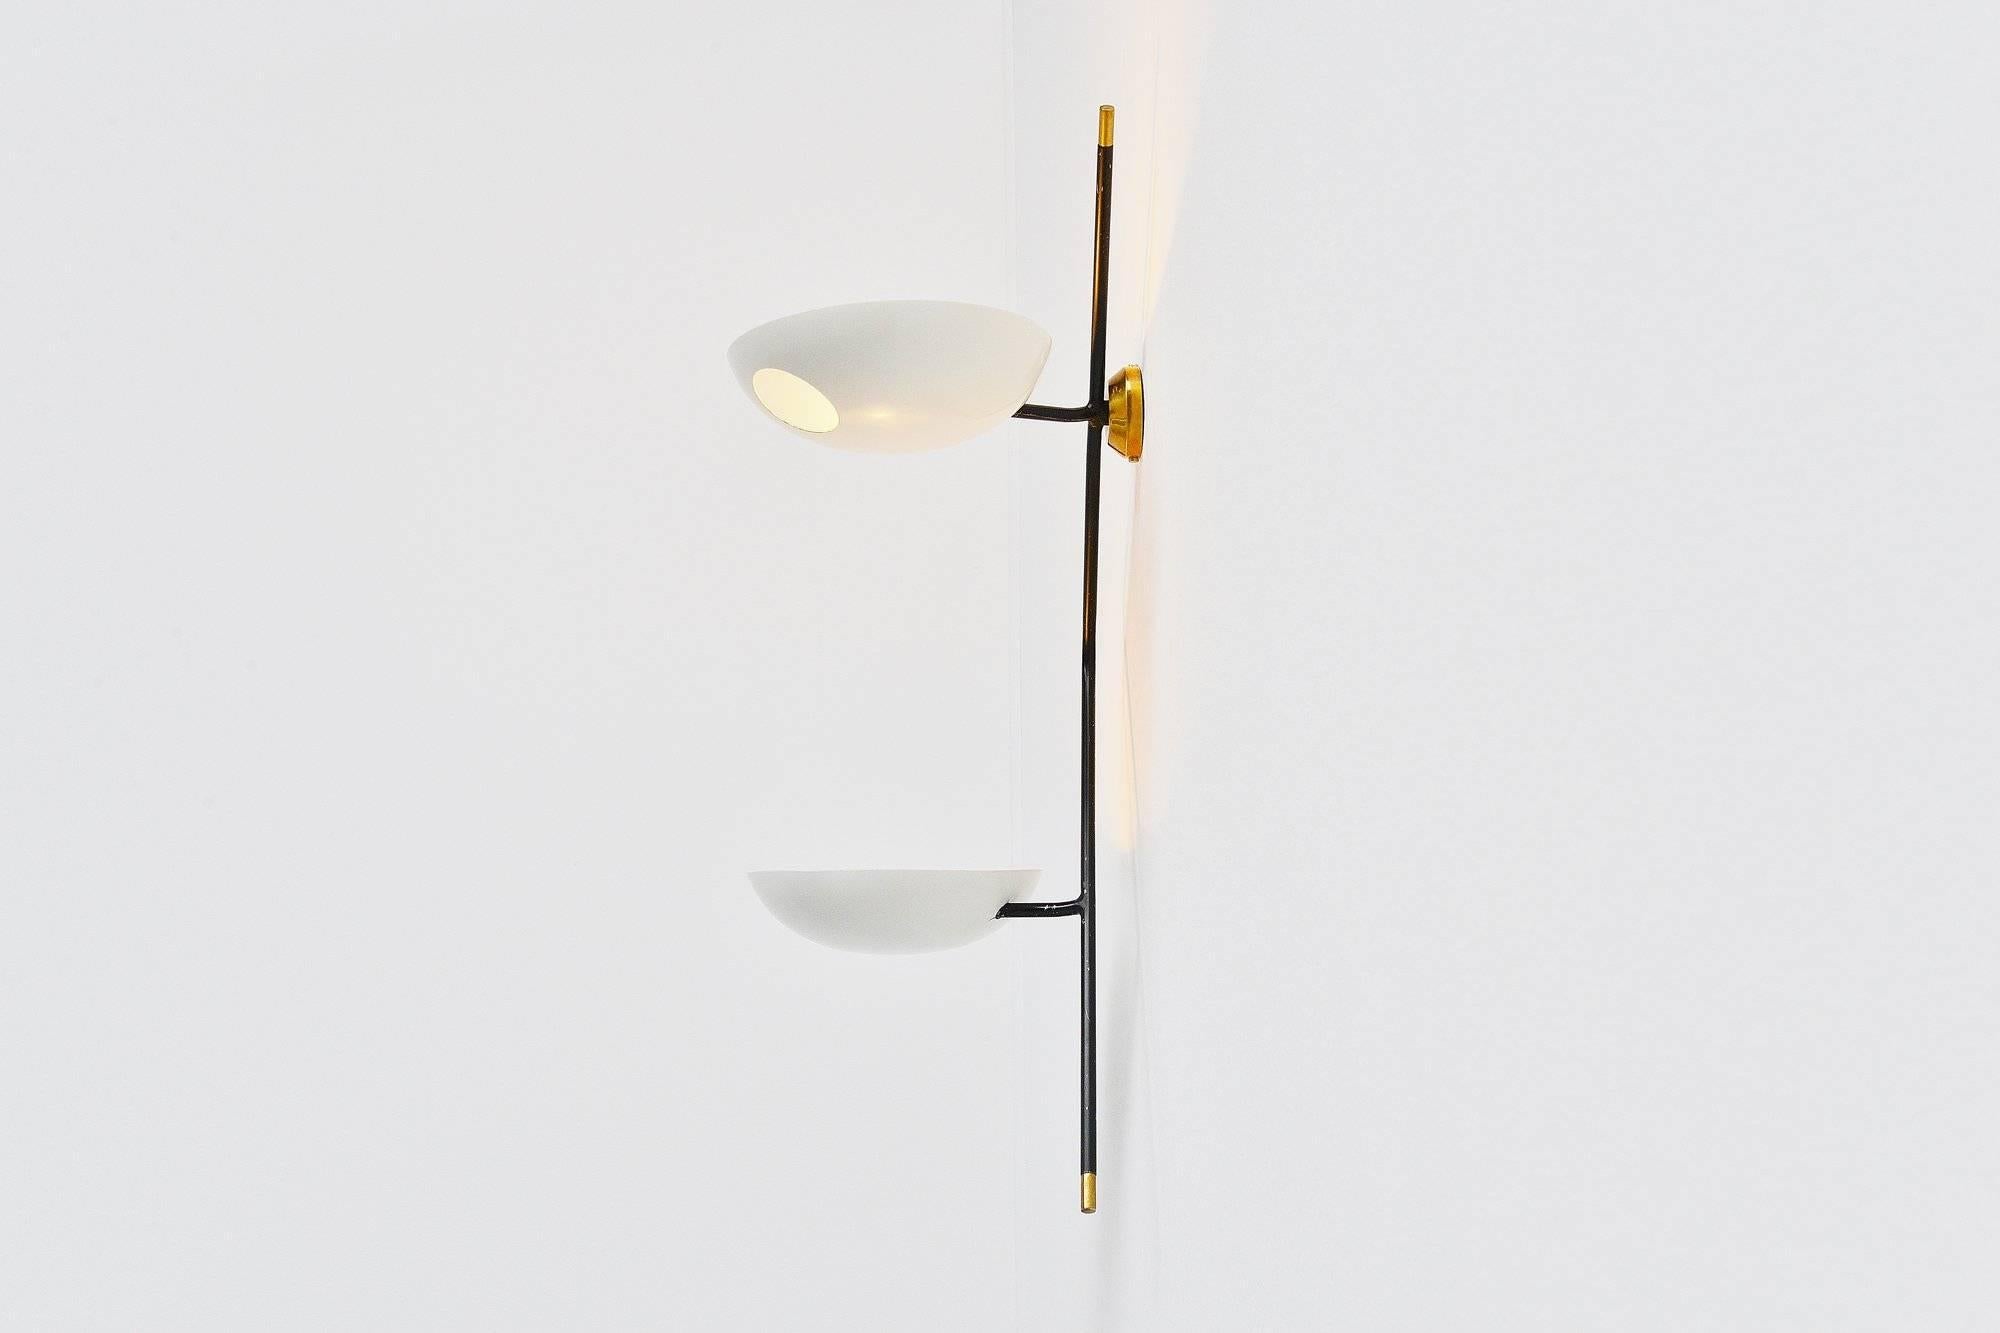 Cold-Painted Stilnovo Wall Lamp by Bruno Gatta, Italy, 1955